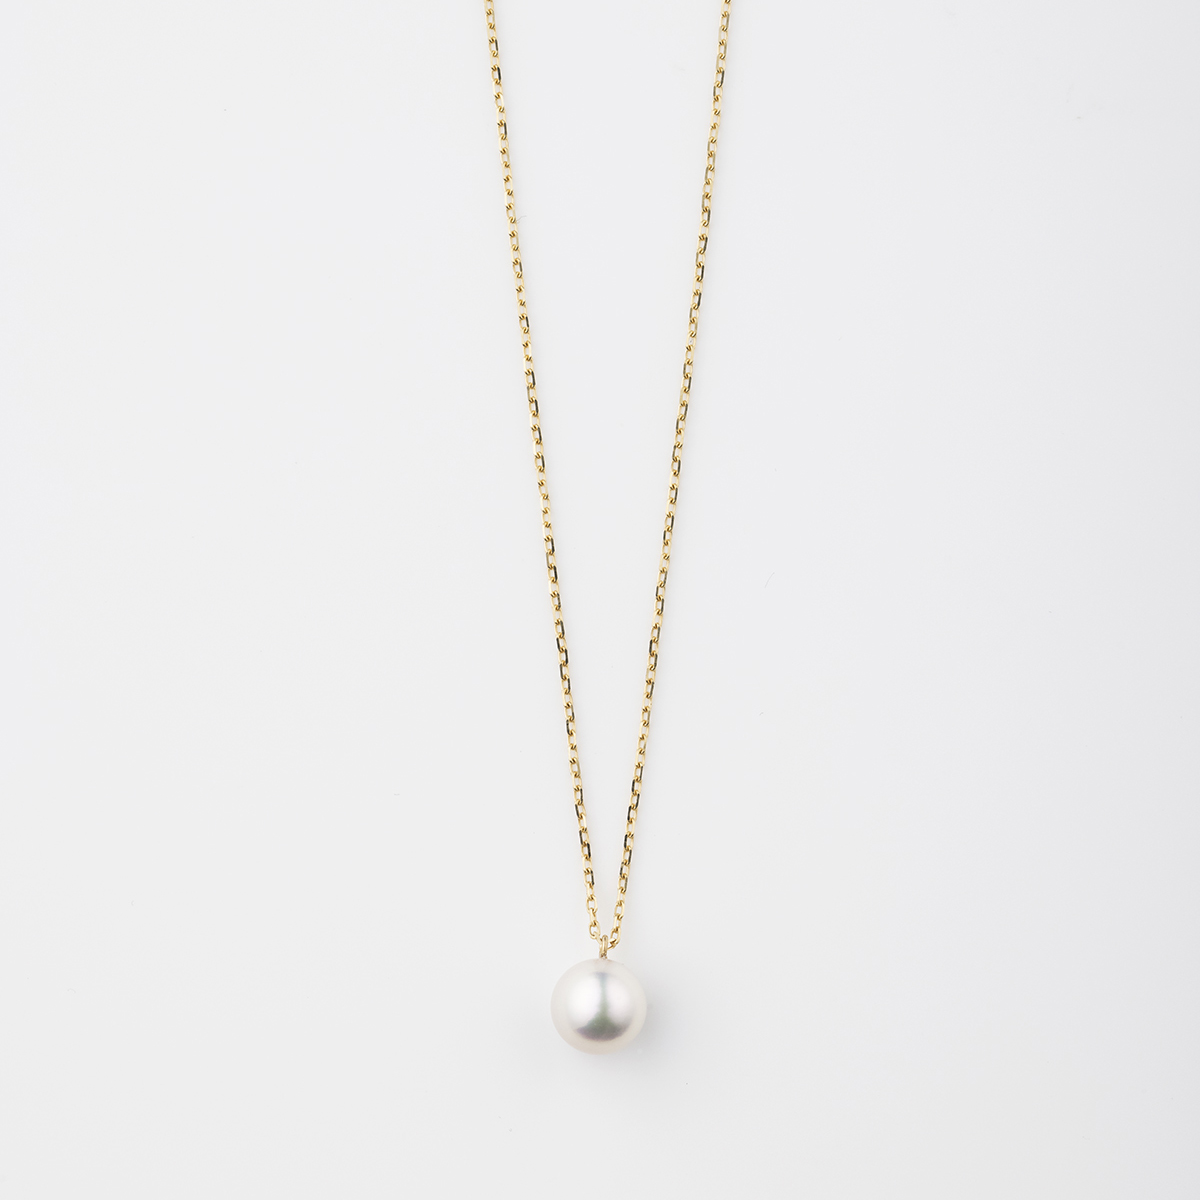 PRK AKOYA PEARL NECKLACE